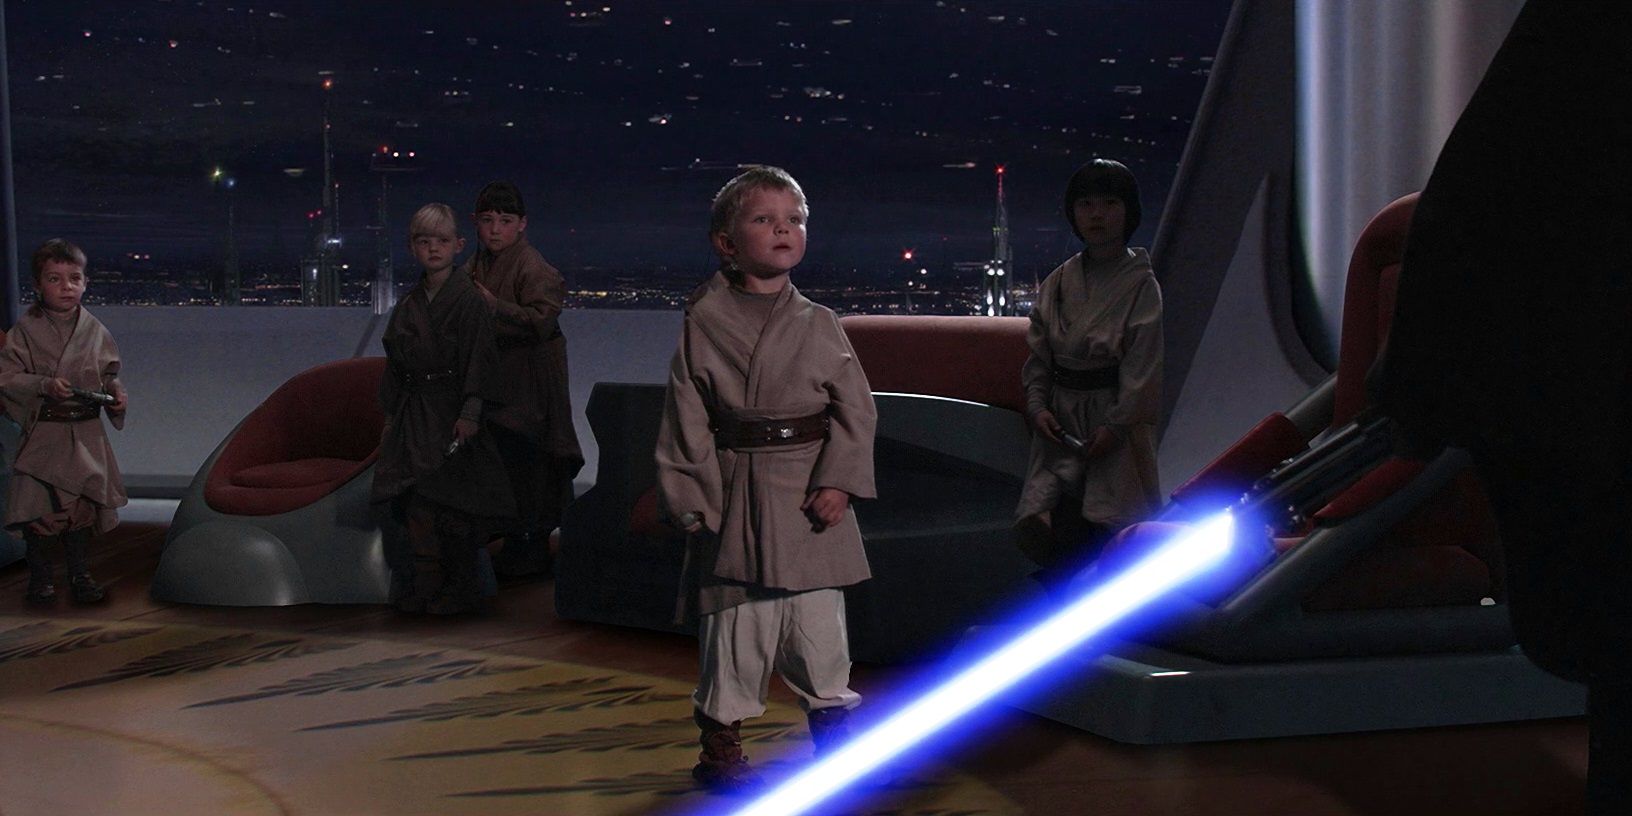 Anakin kills the younglings in Revenge of the Sith